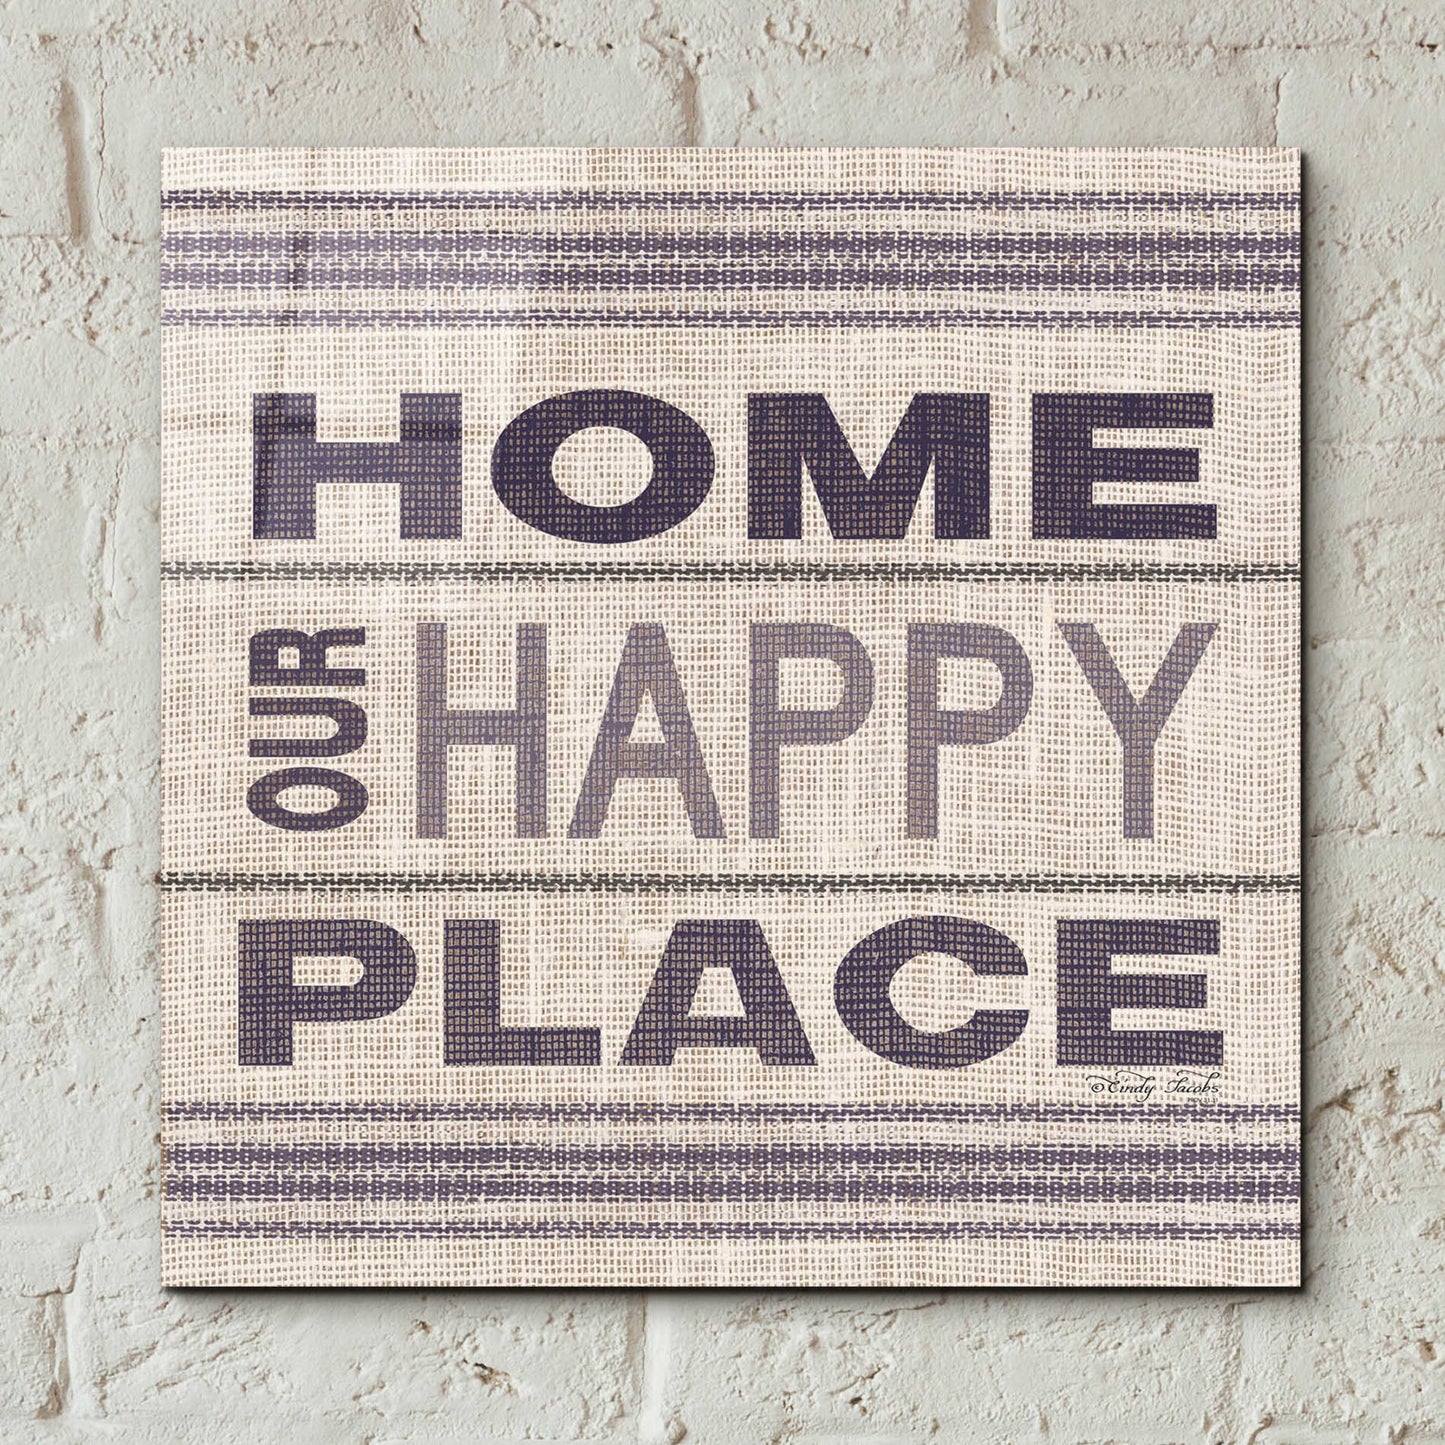 Epic Art 'Home - Our Happy Place' by Cindy Jacobs, Acrylic Glass Wall Art,12x12